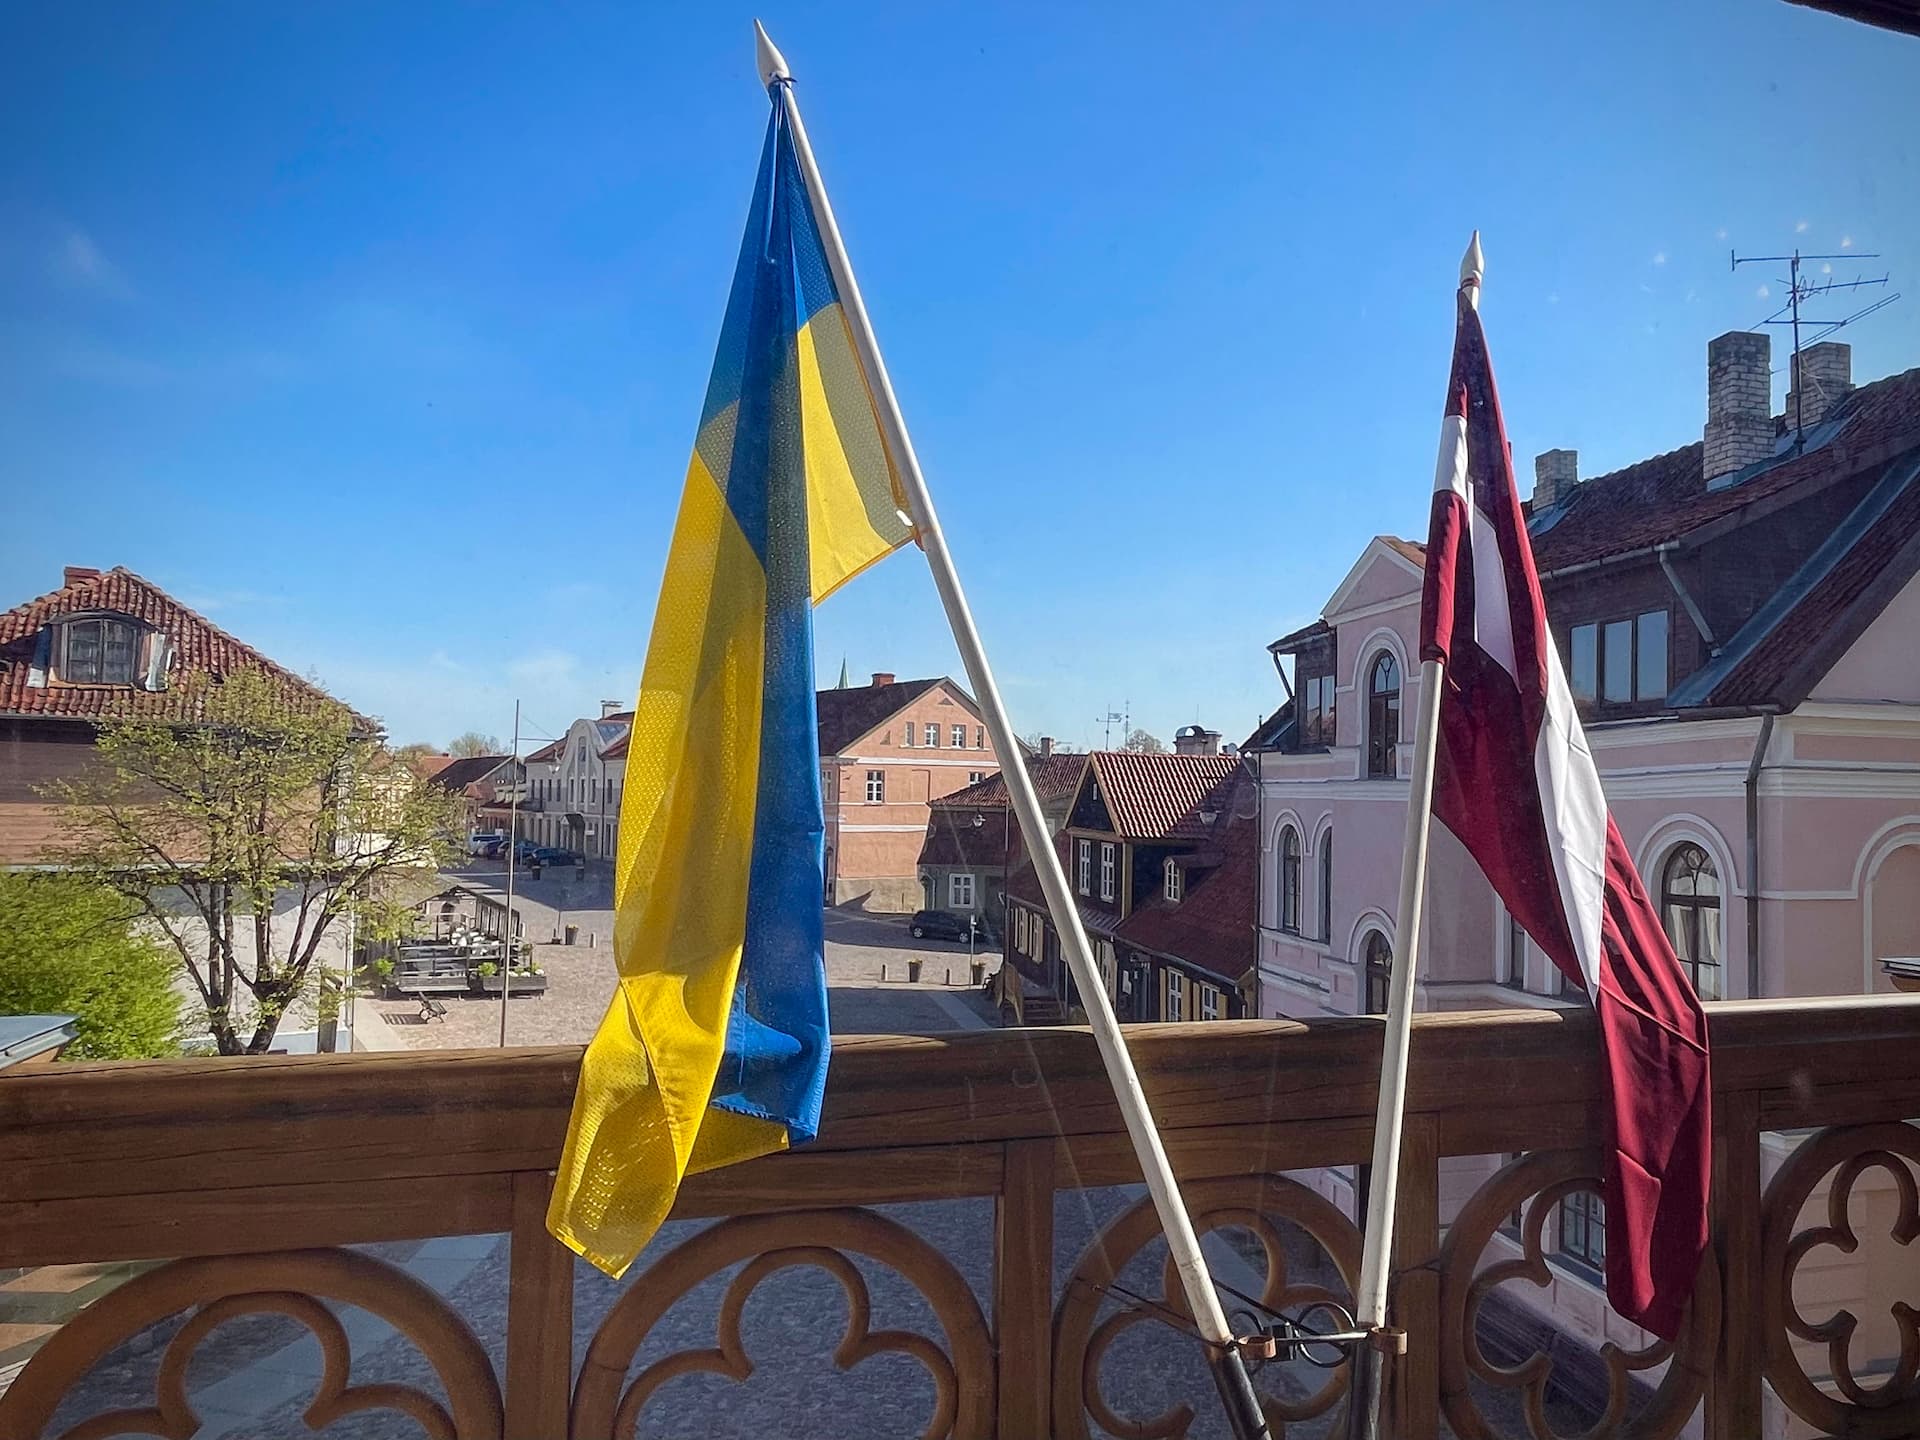 View and flags from the balcony of the Kuldiga City Council. 10.05.23